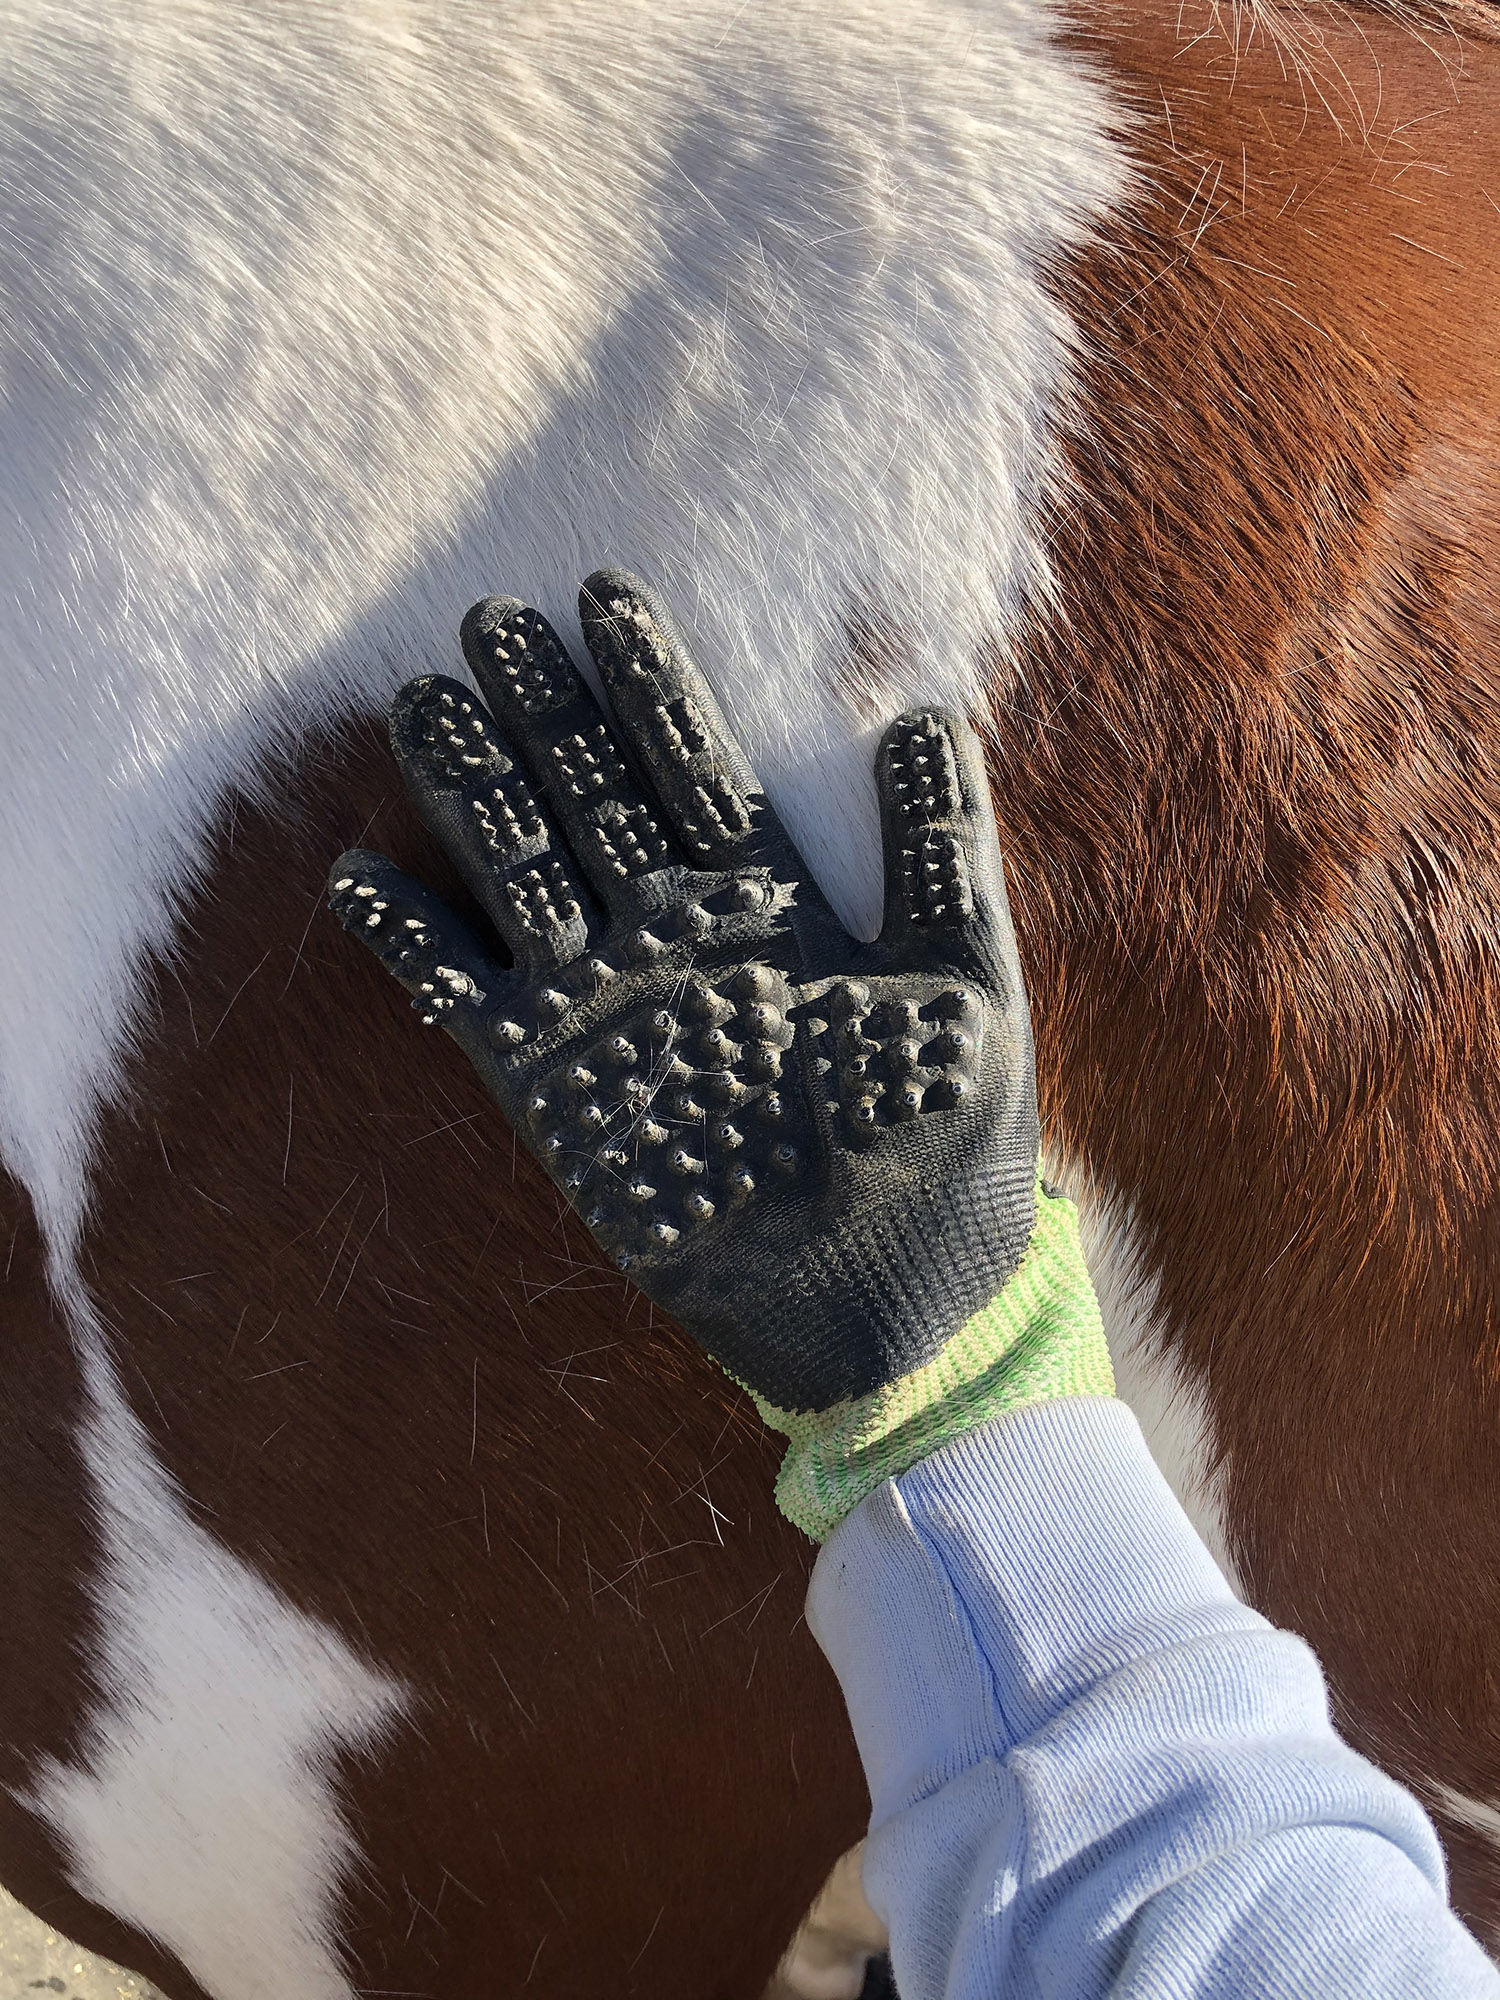 Shedding season with grooming gloves